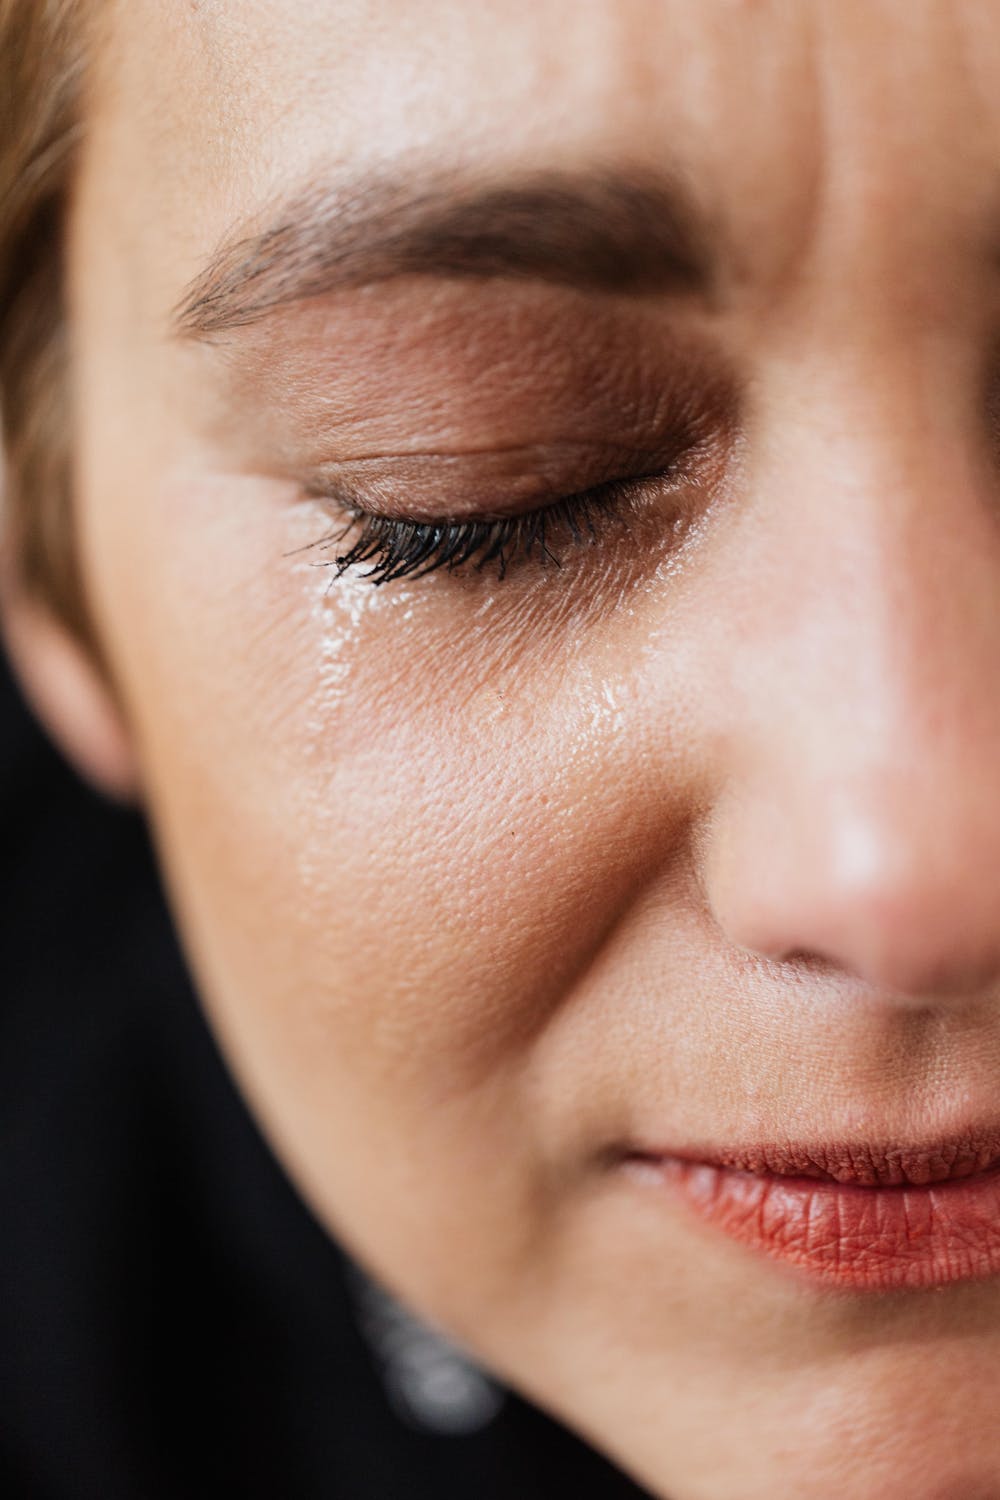 Woman crying | Source: Pexels